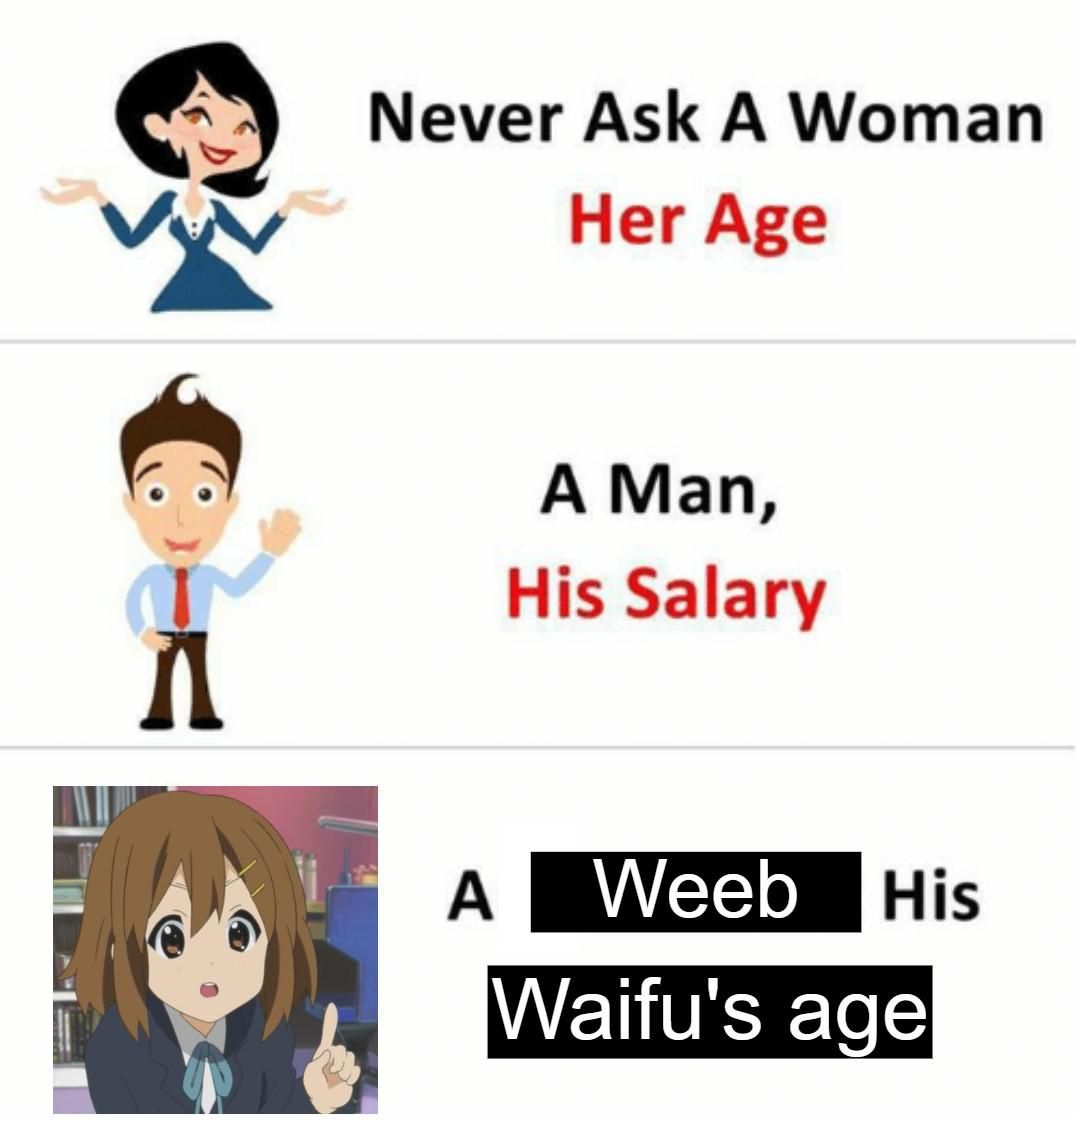 It's not my fault that I age and my waifu doesn't